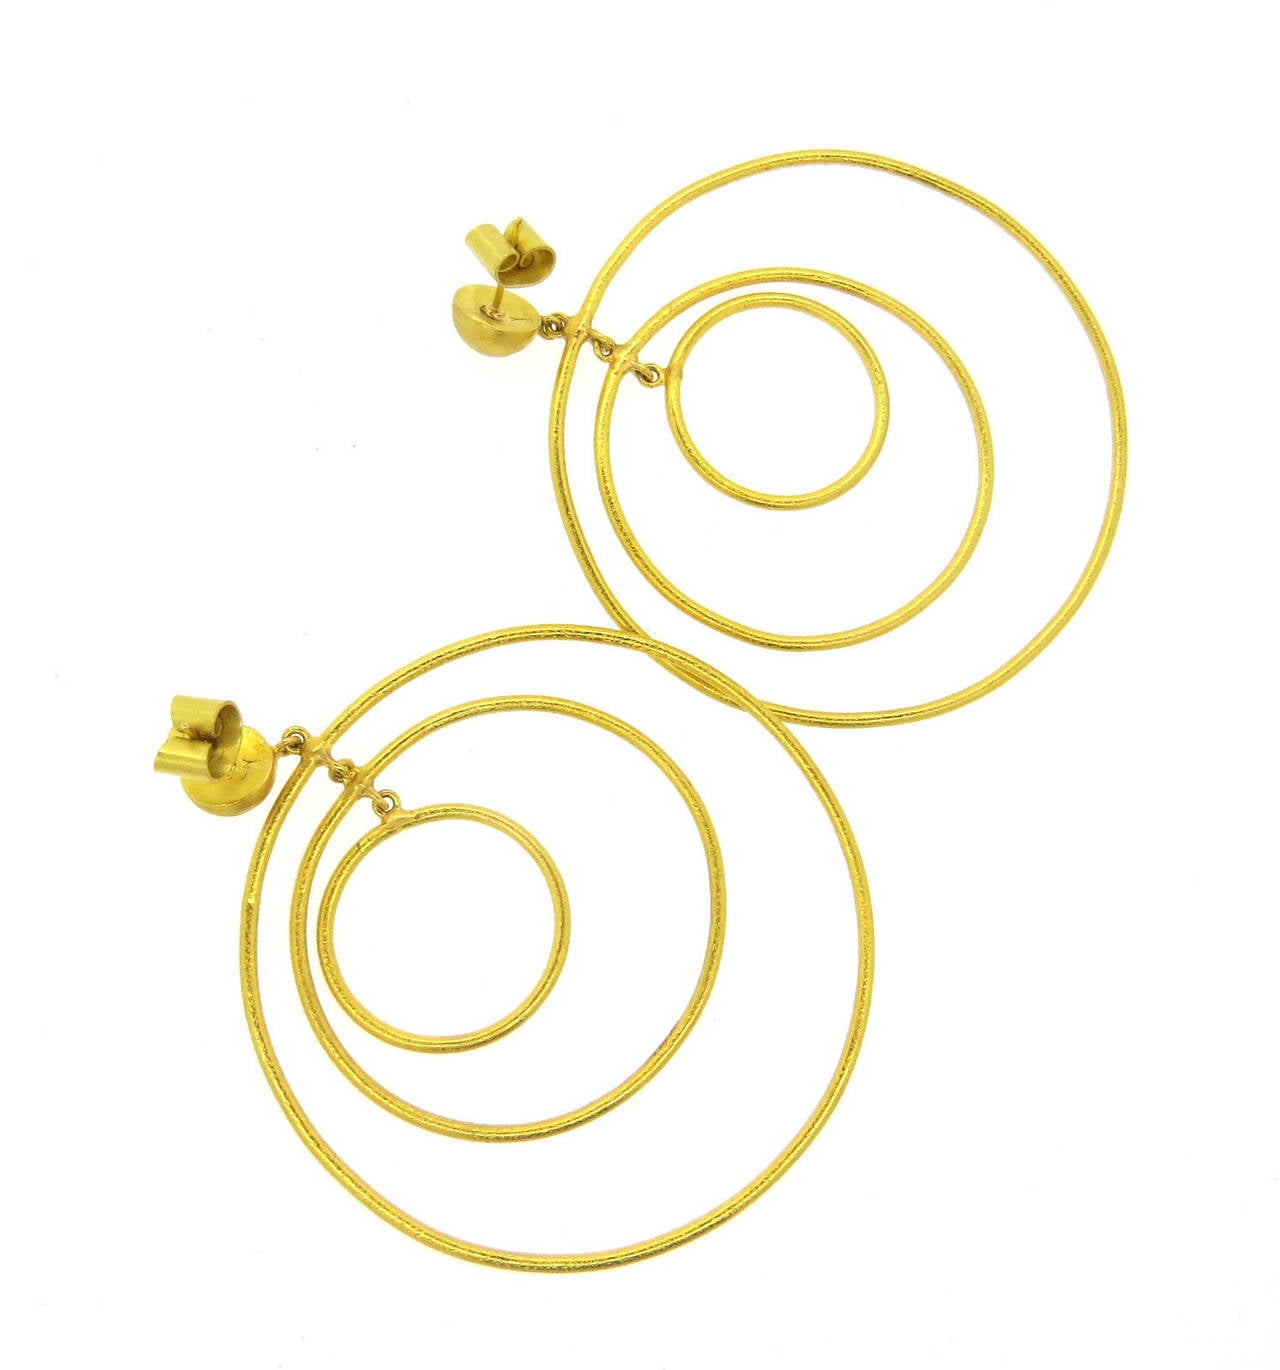 Large triple circle earrings, crafted in pure 24k gold by Yossi Harari. Earrings are 75mm long, largest circle is 62mm in diameter . Weight - 28.6 grams